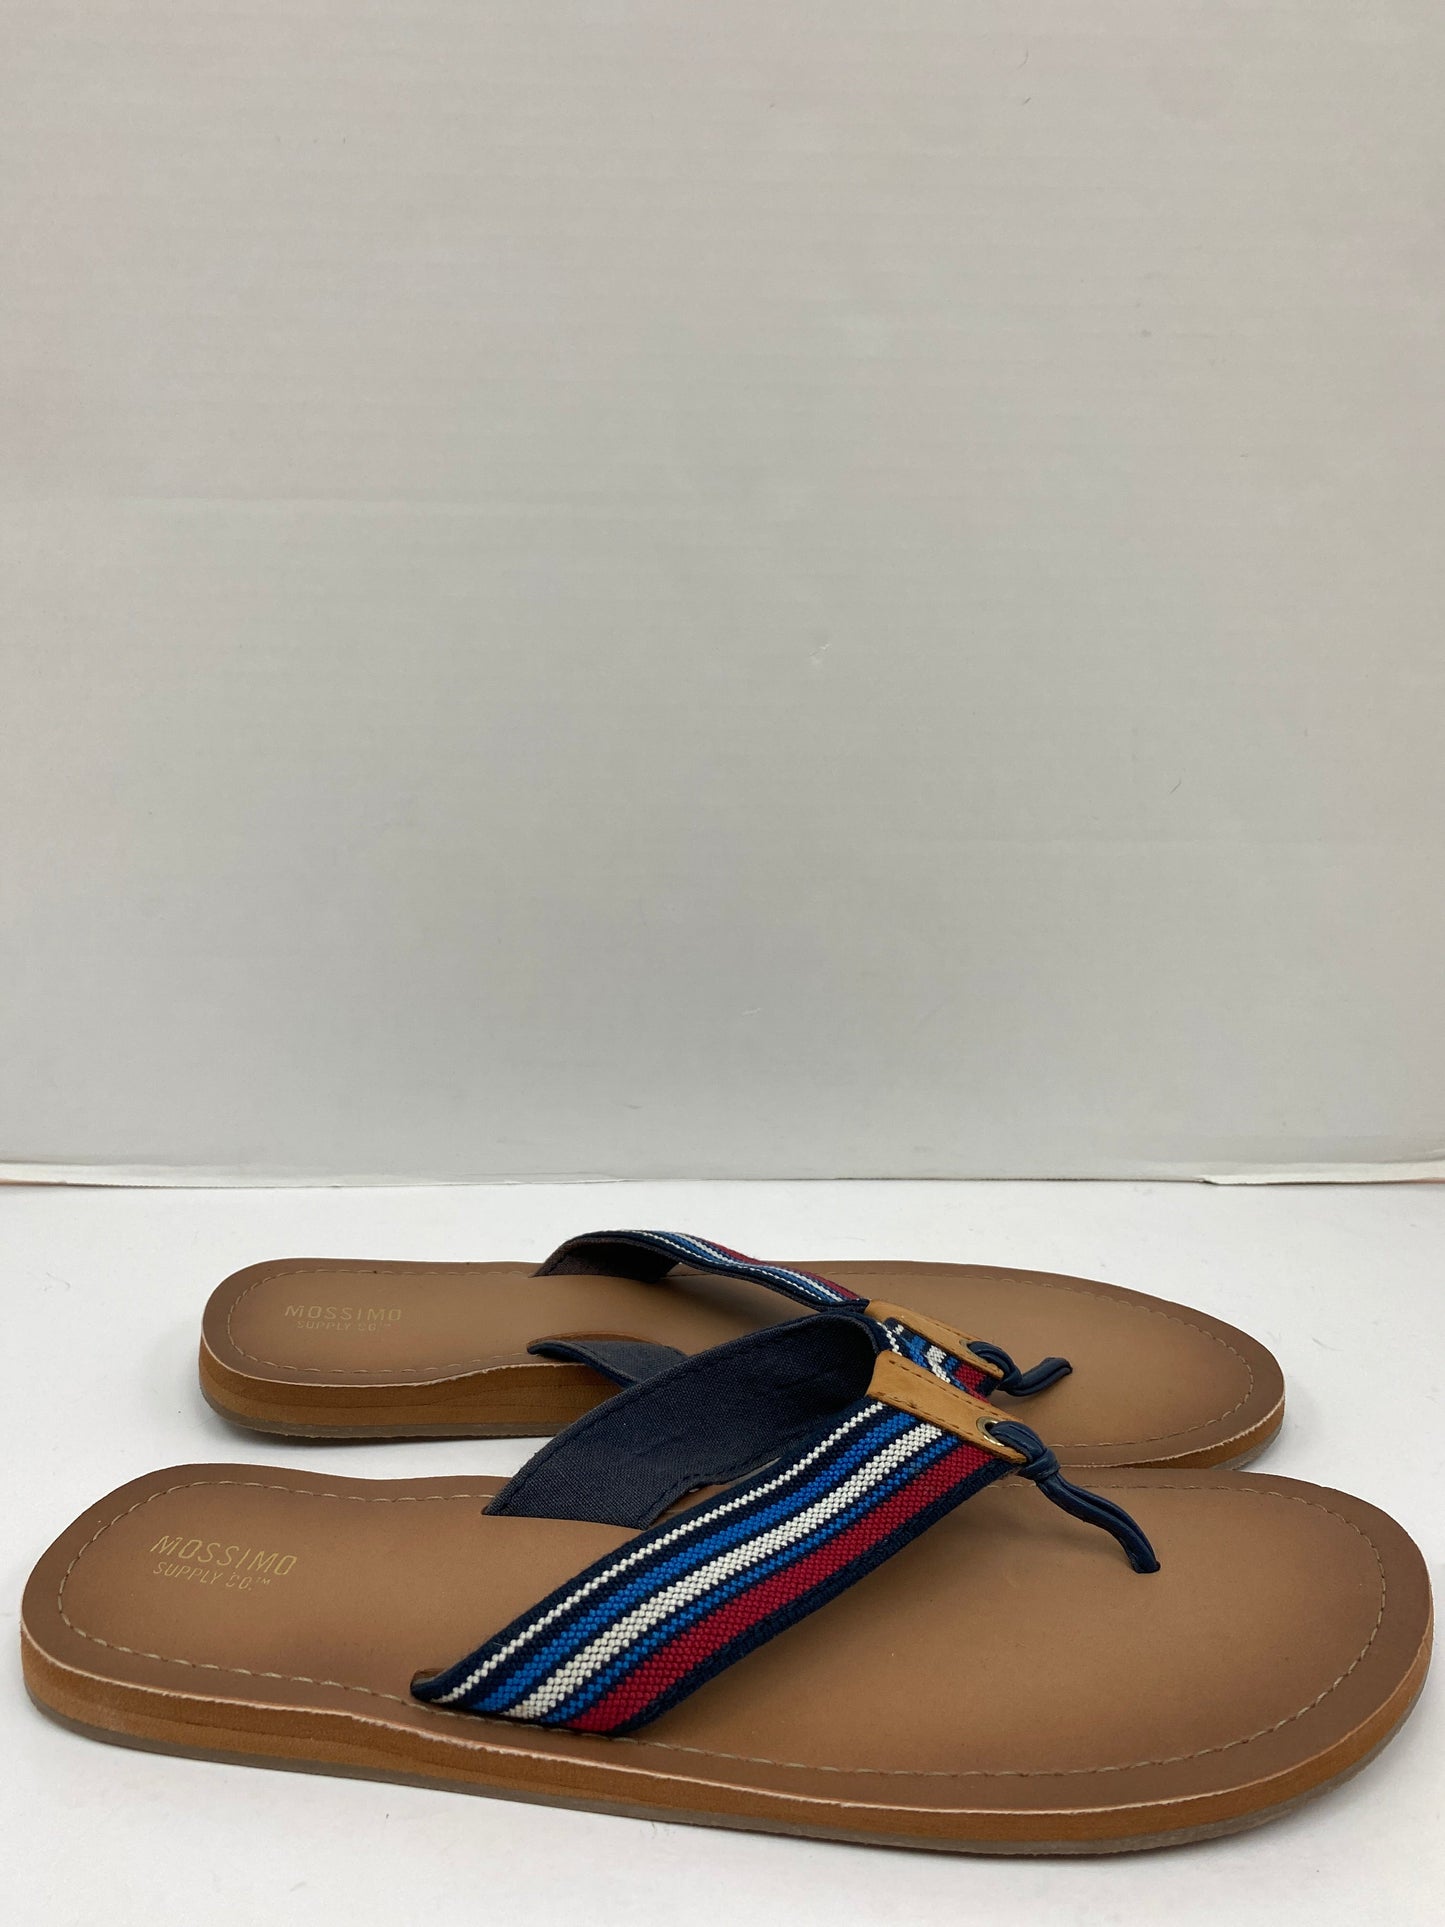 Sandals Flats By Mossimo  Size: 11